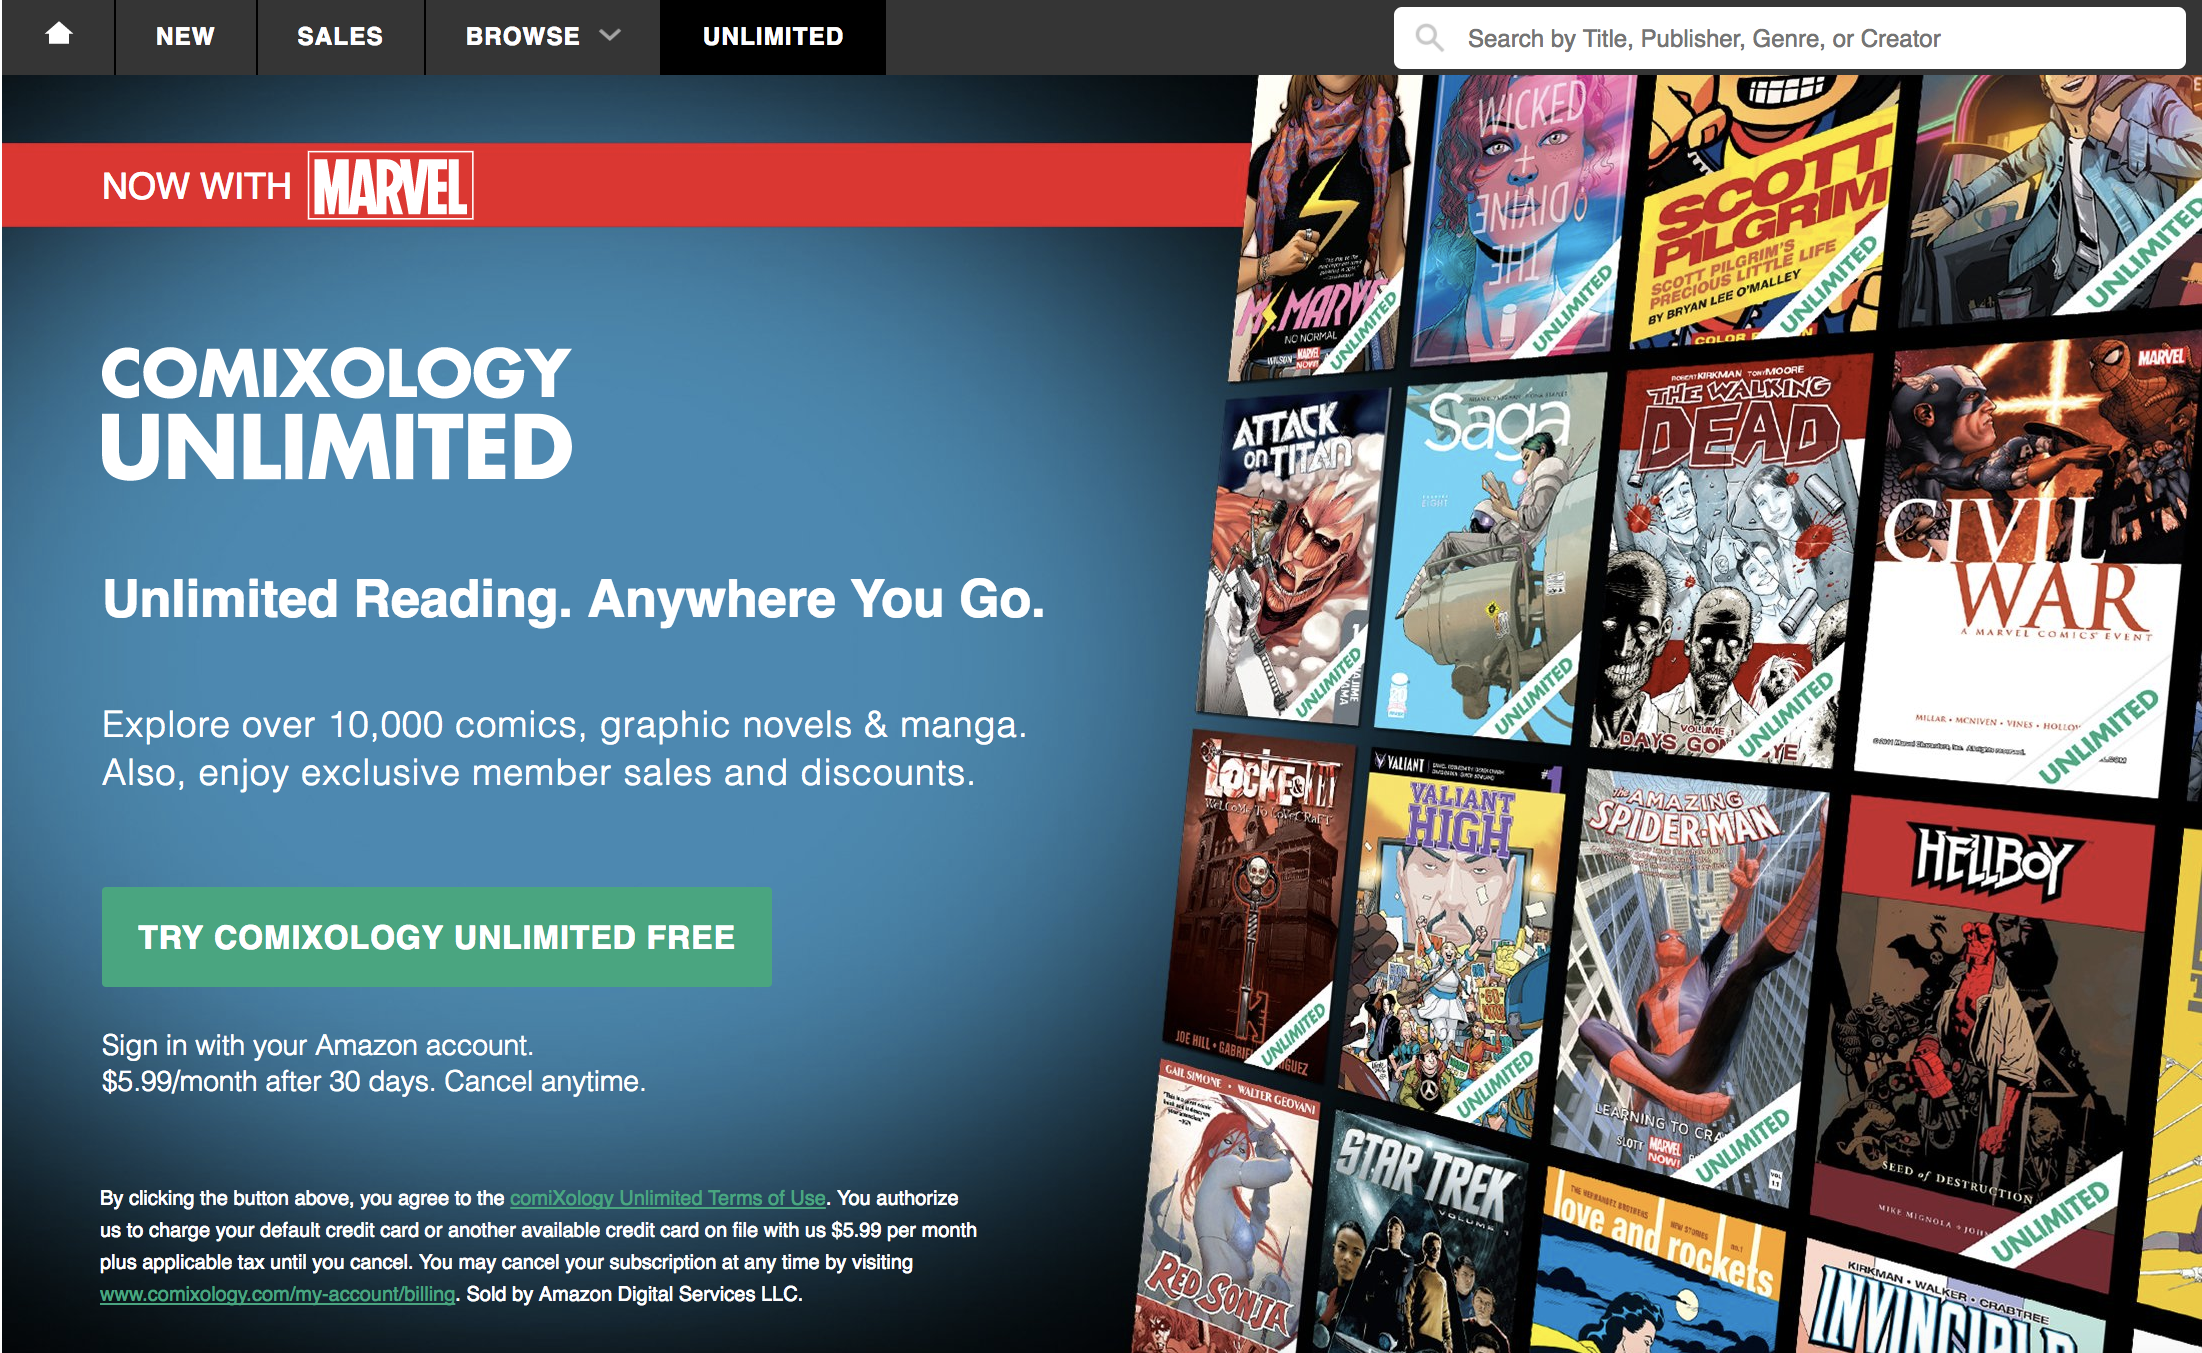 Is ComiXology Unlimited worth it?